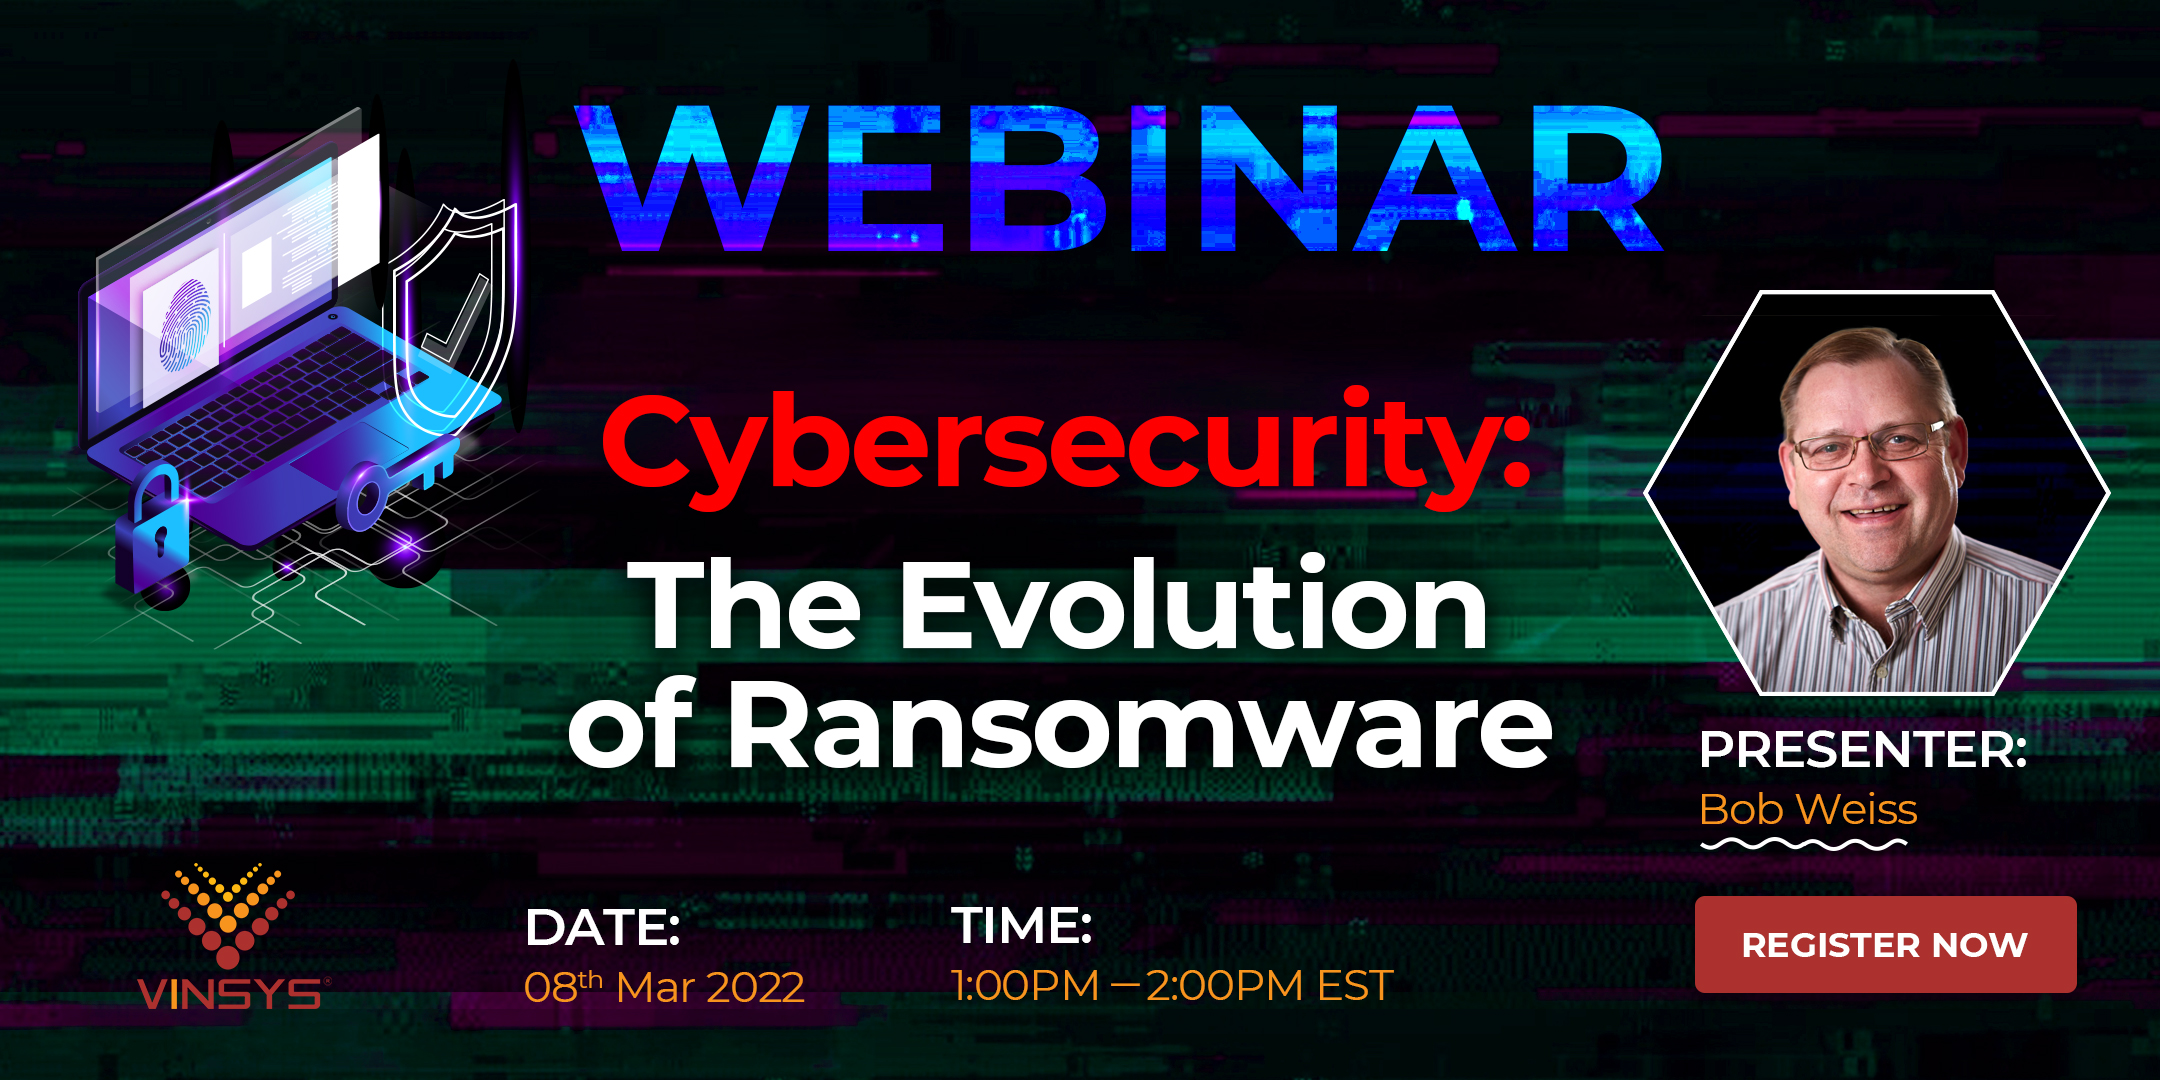 Webinar on Cybersecurity: The Evolution of Ransomware On 8th March 2022 by Bob Weiss, Online Event